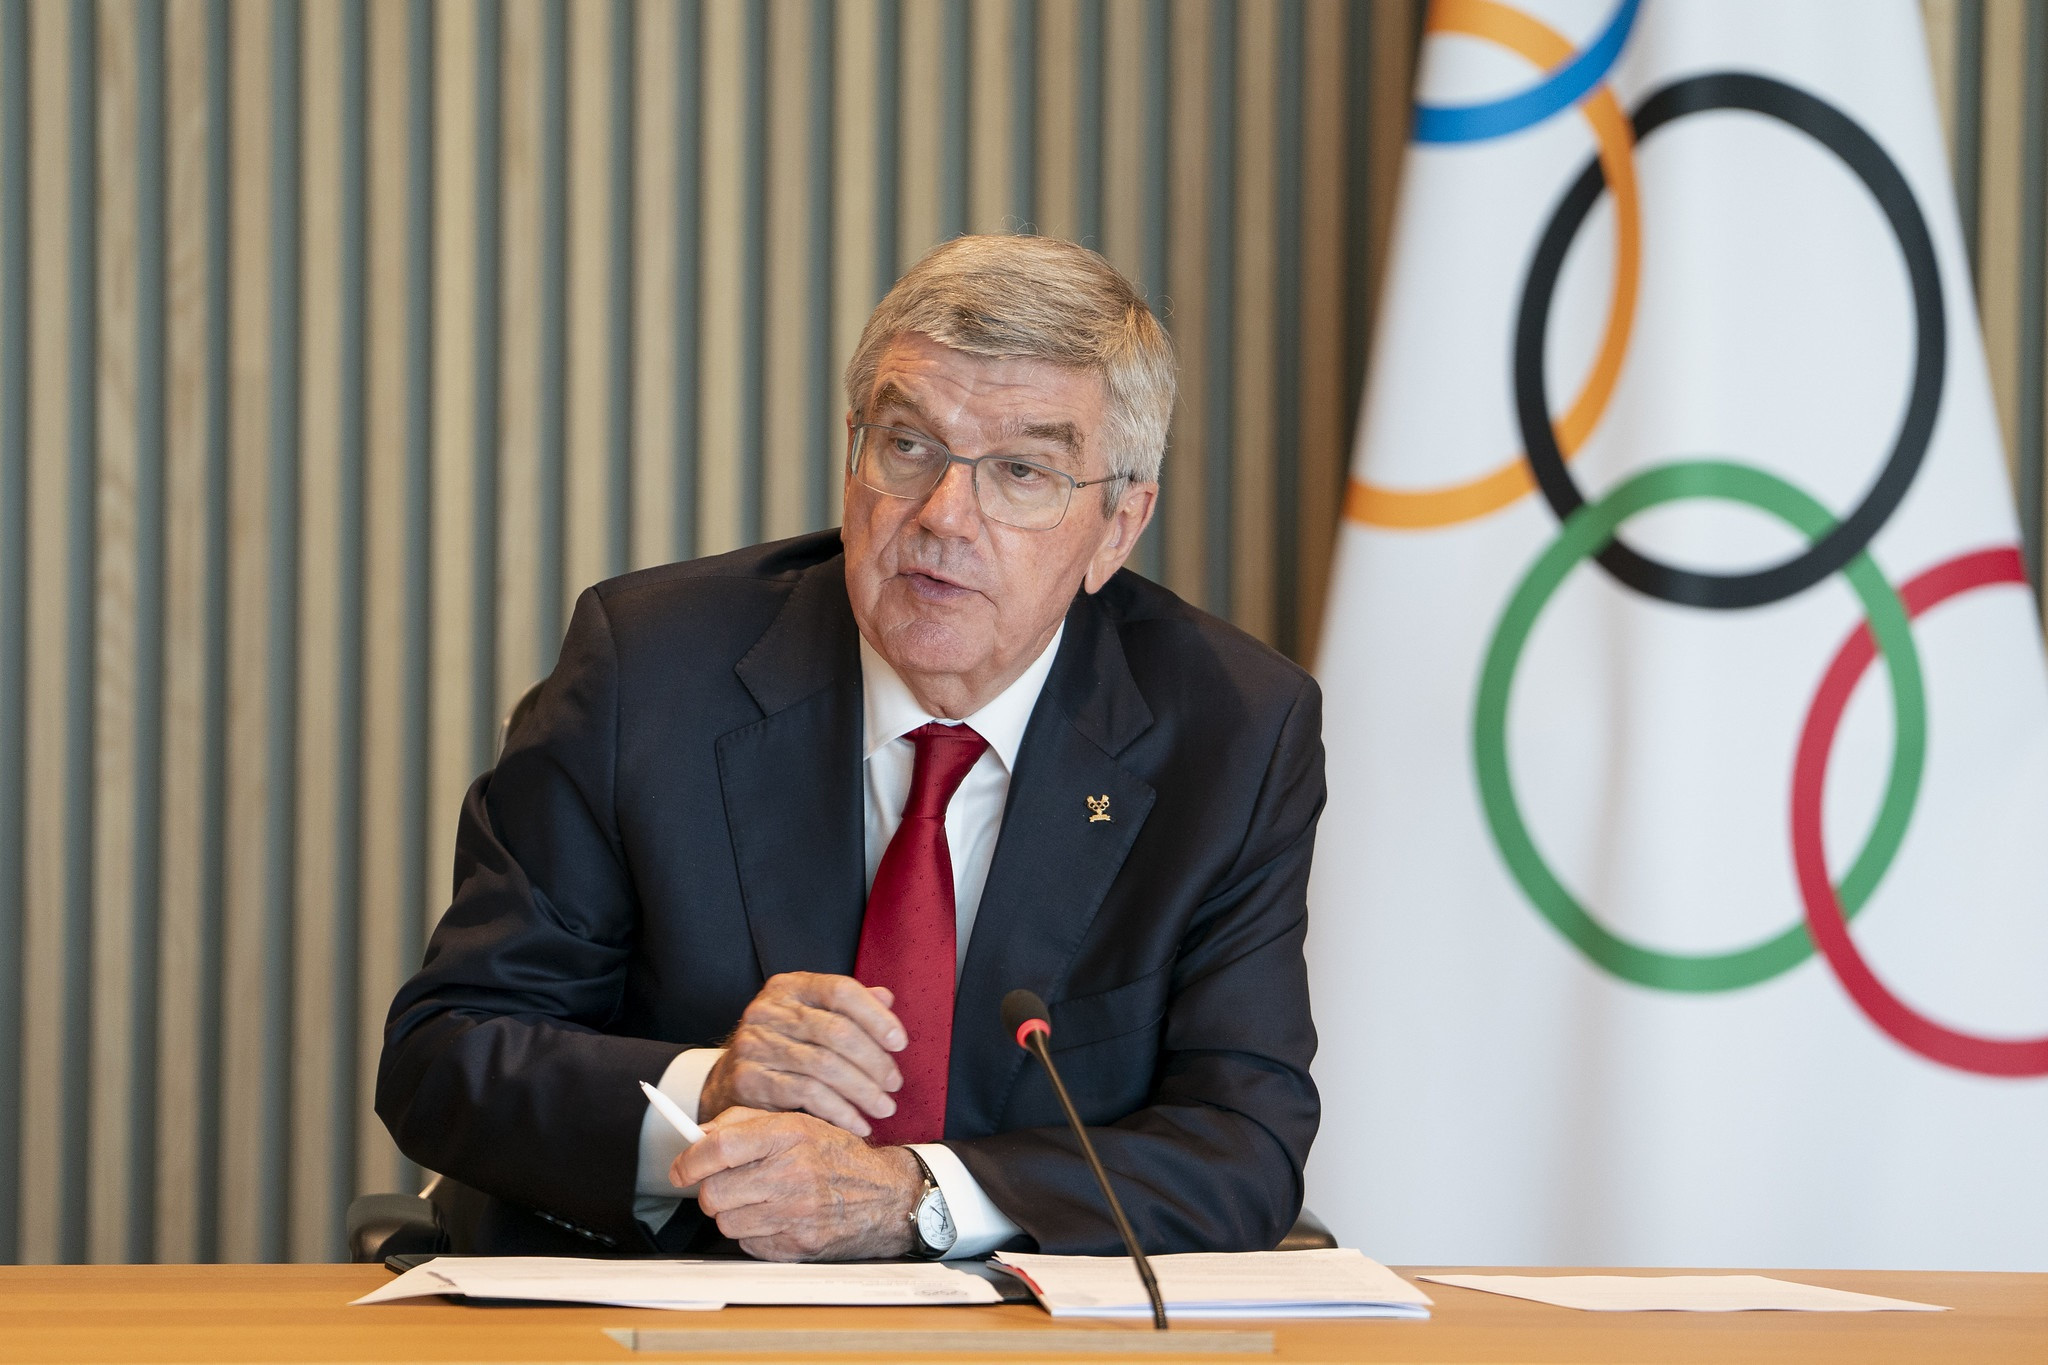 IOC President Thomas Bach claims the proposed changes to the Olympic Charter present a 